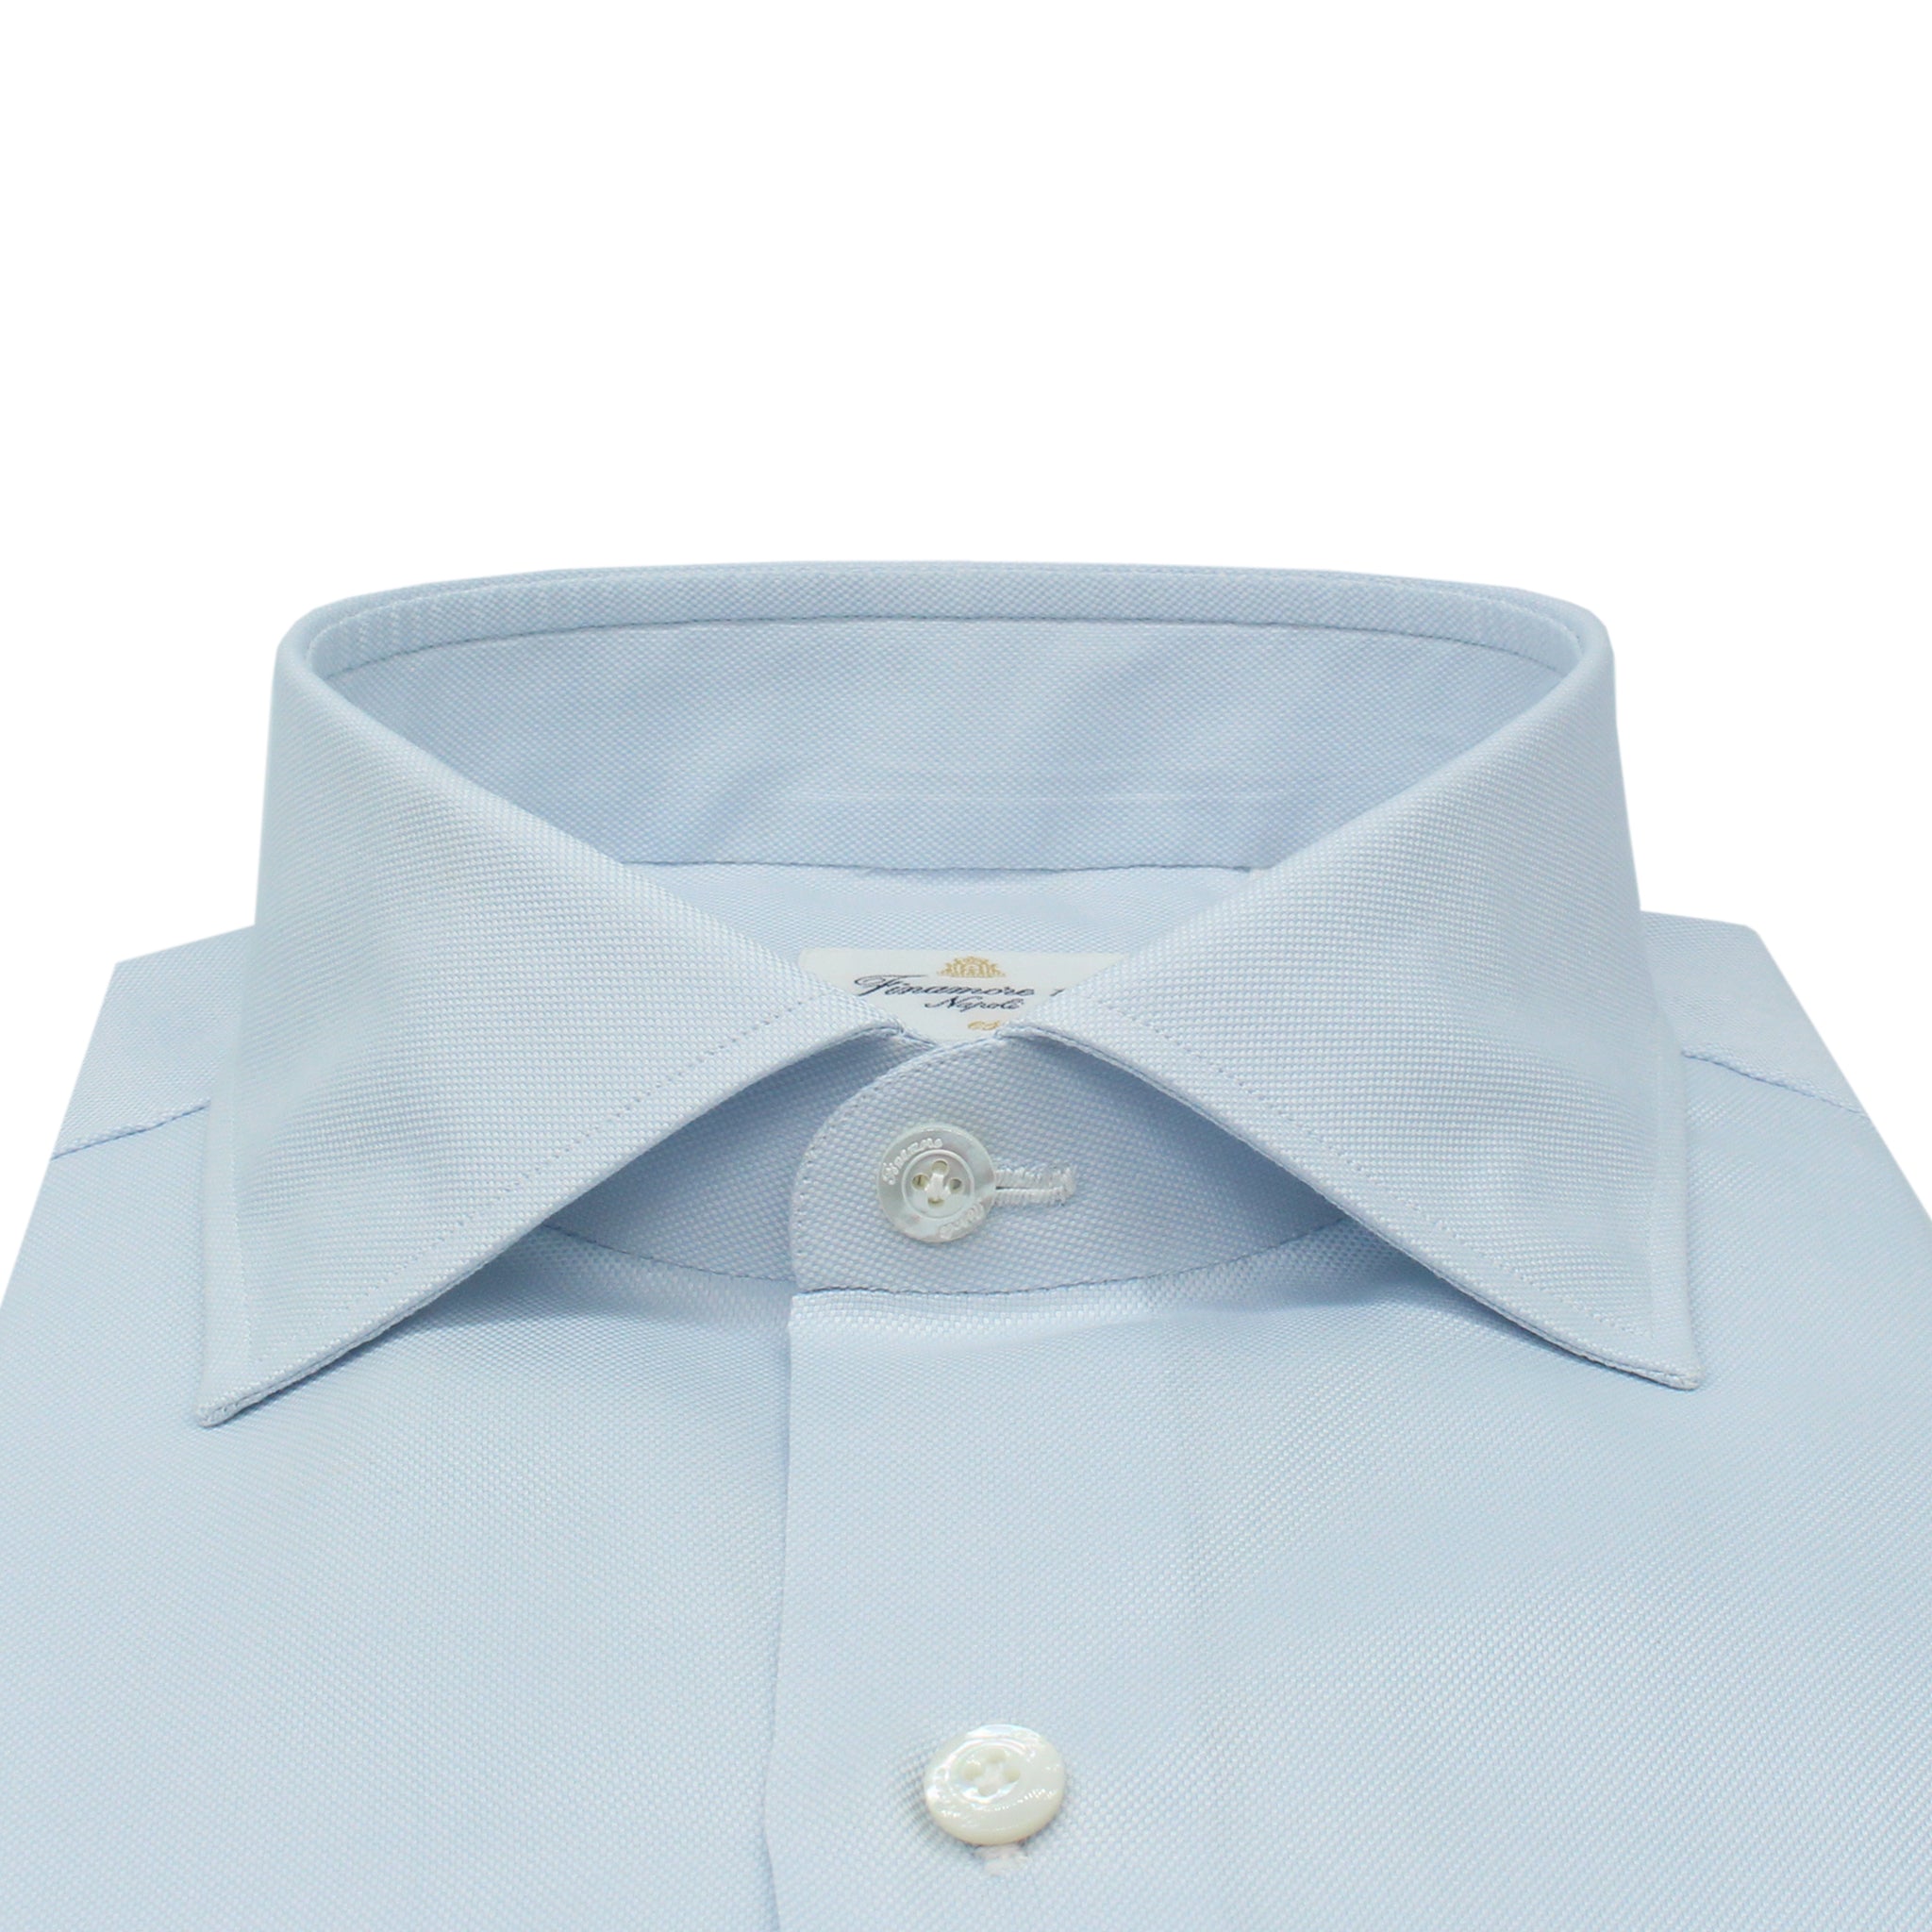 Exclusive hand-sewn tailoring shirt in Sea Island light blue cotton